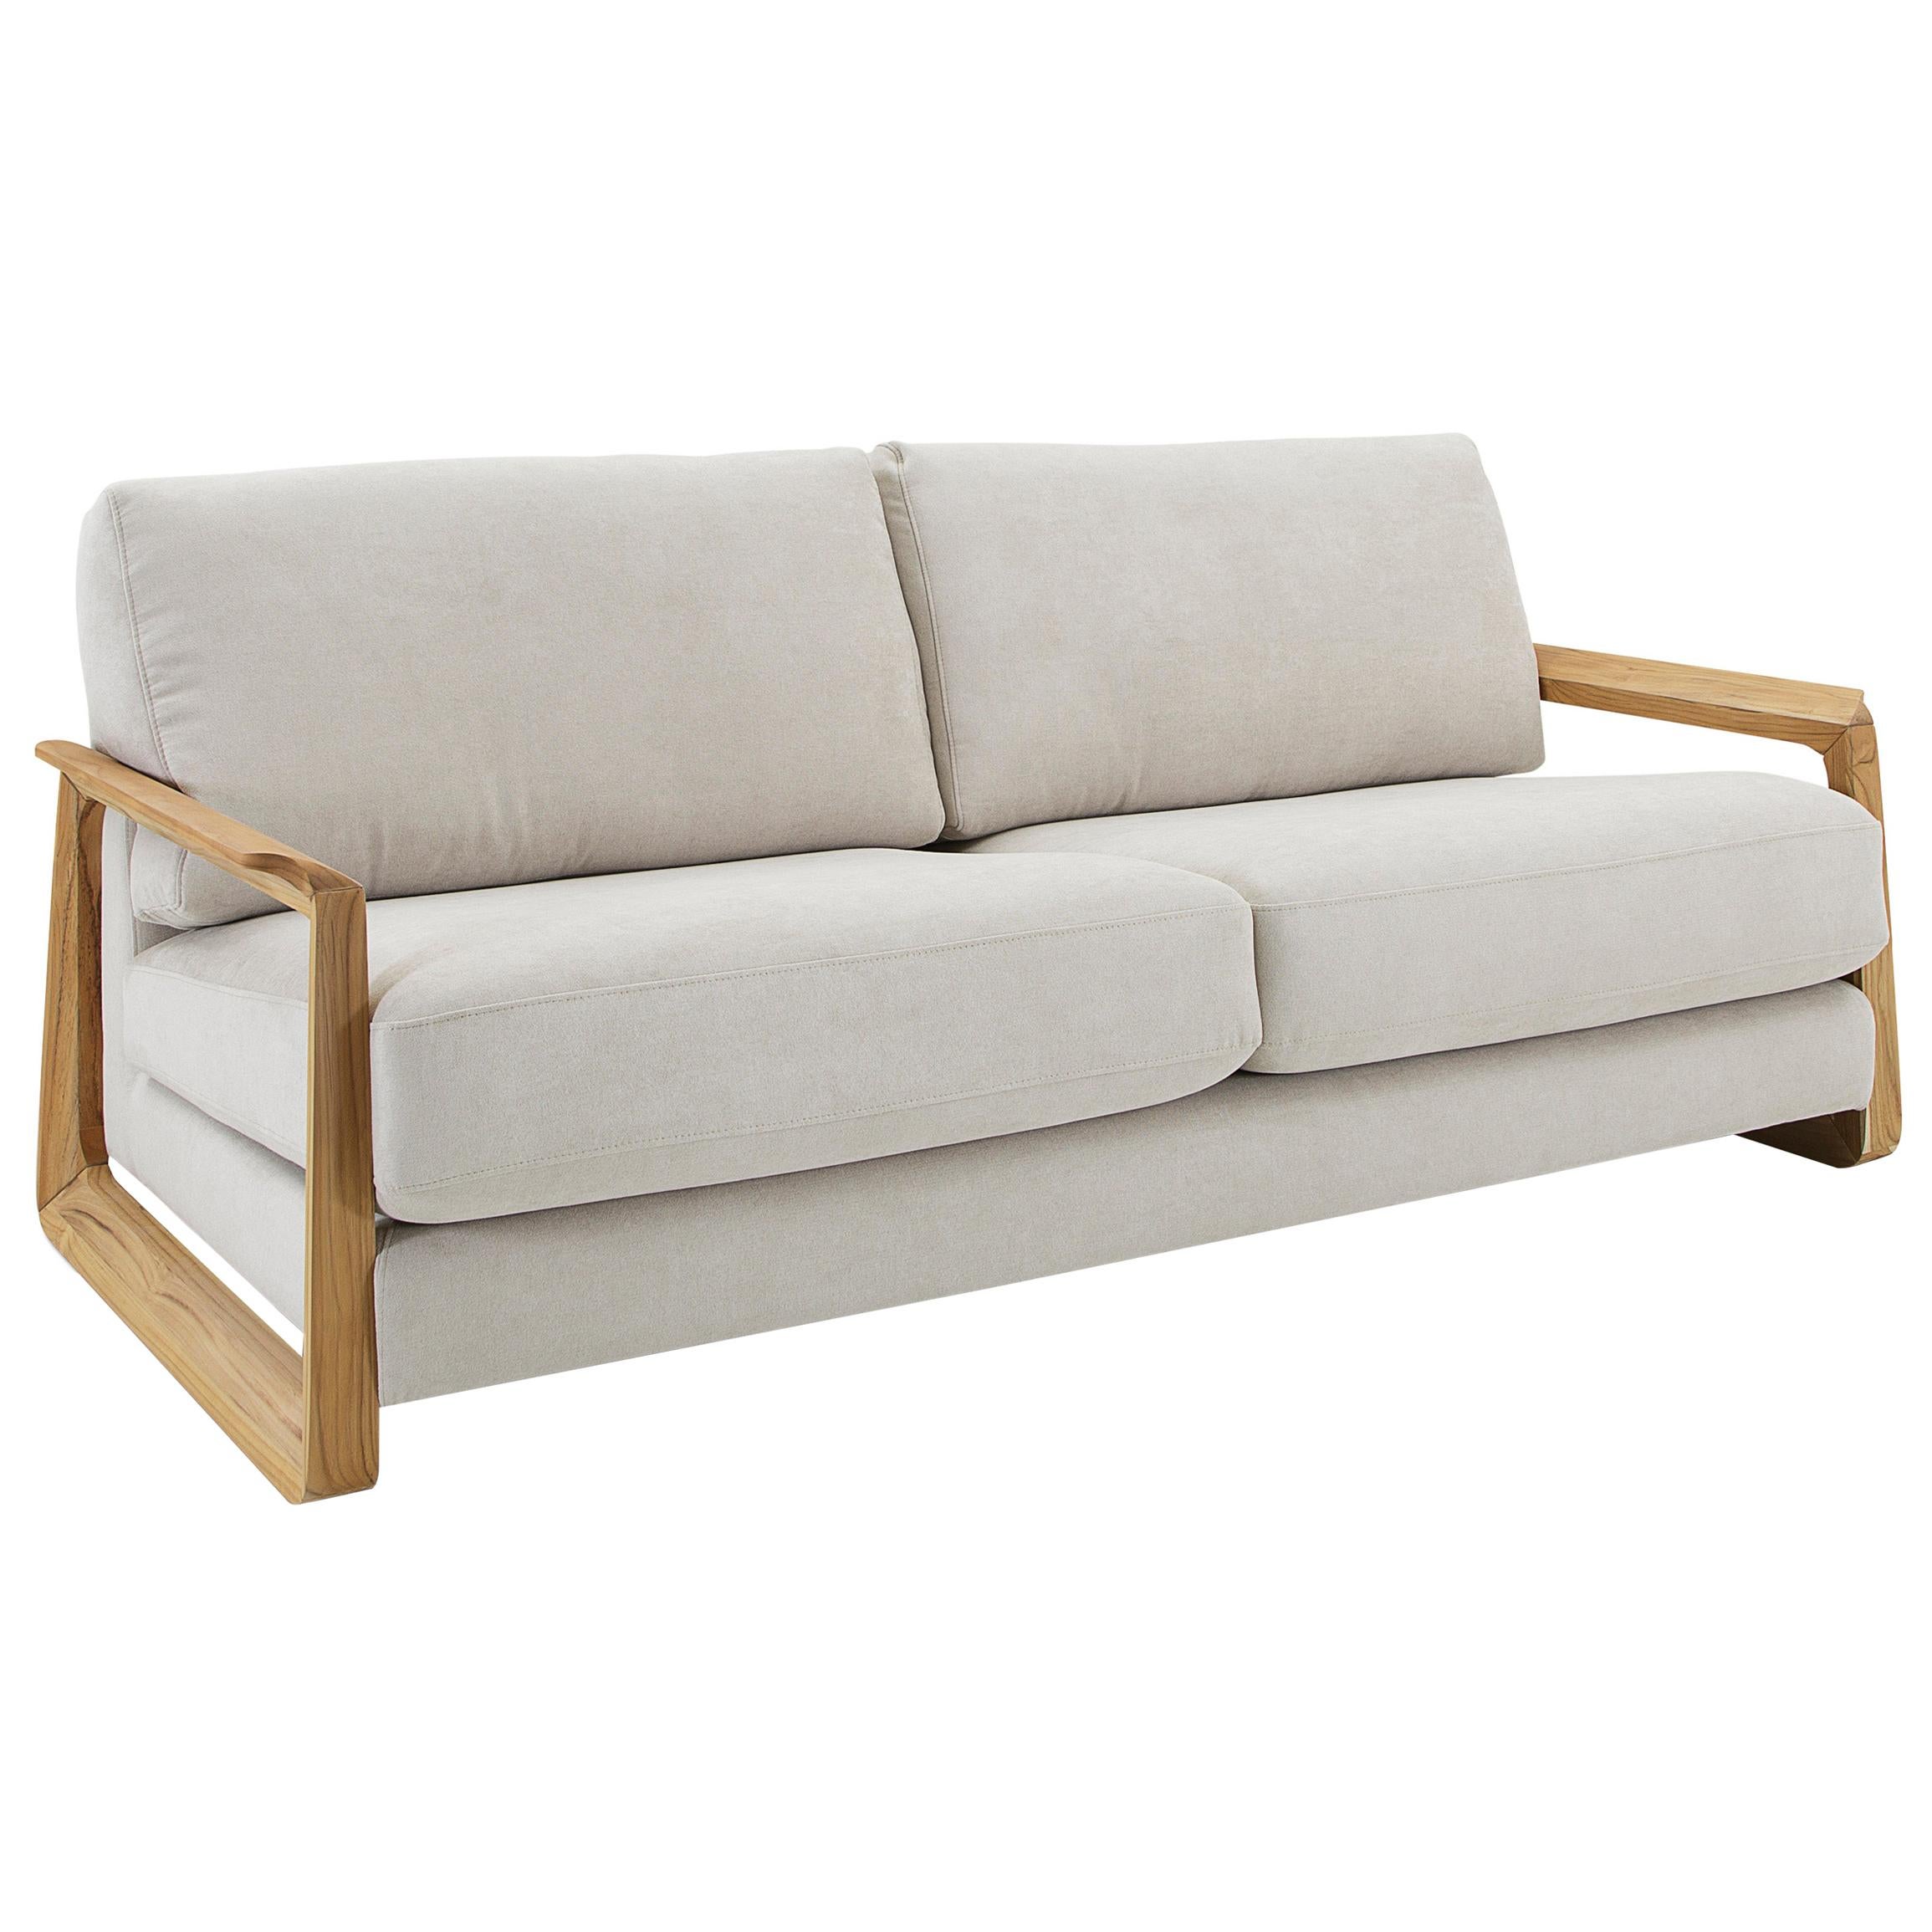 Fine Three-Seat Sofa Upholstered in an Oatmeal Fabric and Teak Wood Arms